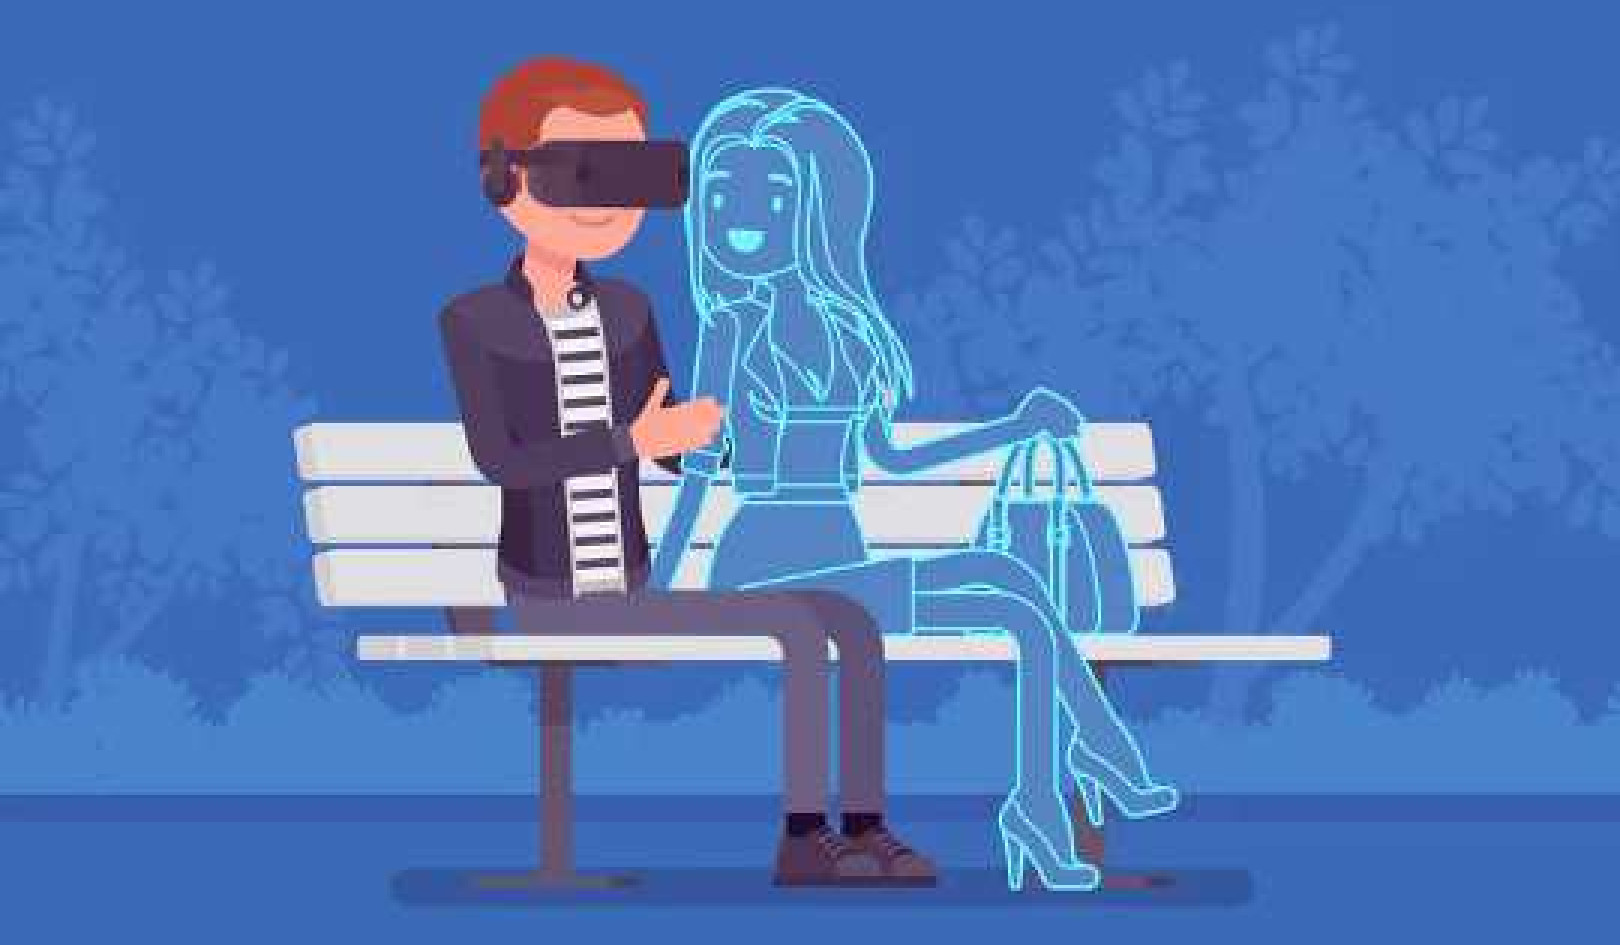 Love In The Time of Algorithms: Would You Let Artificial Intelligence Choose Your Partner?